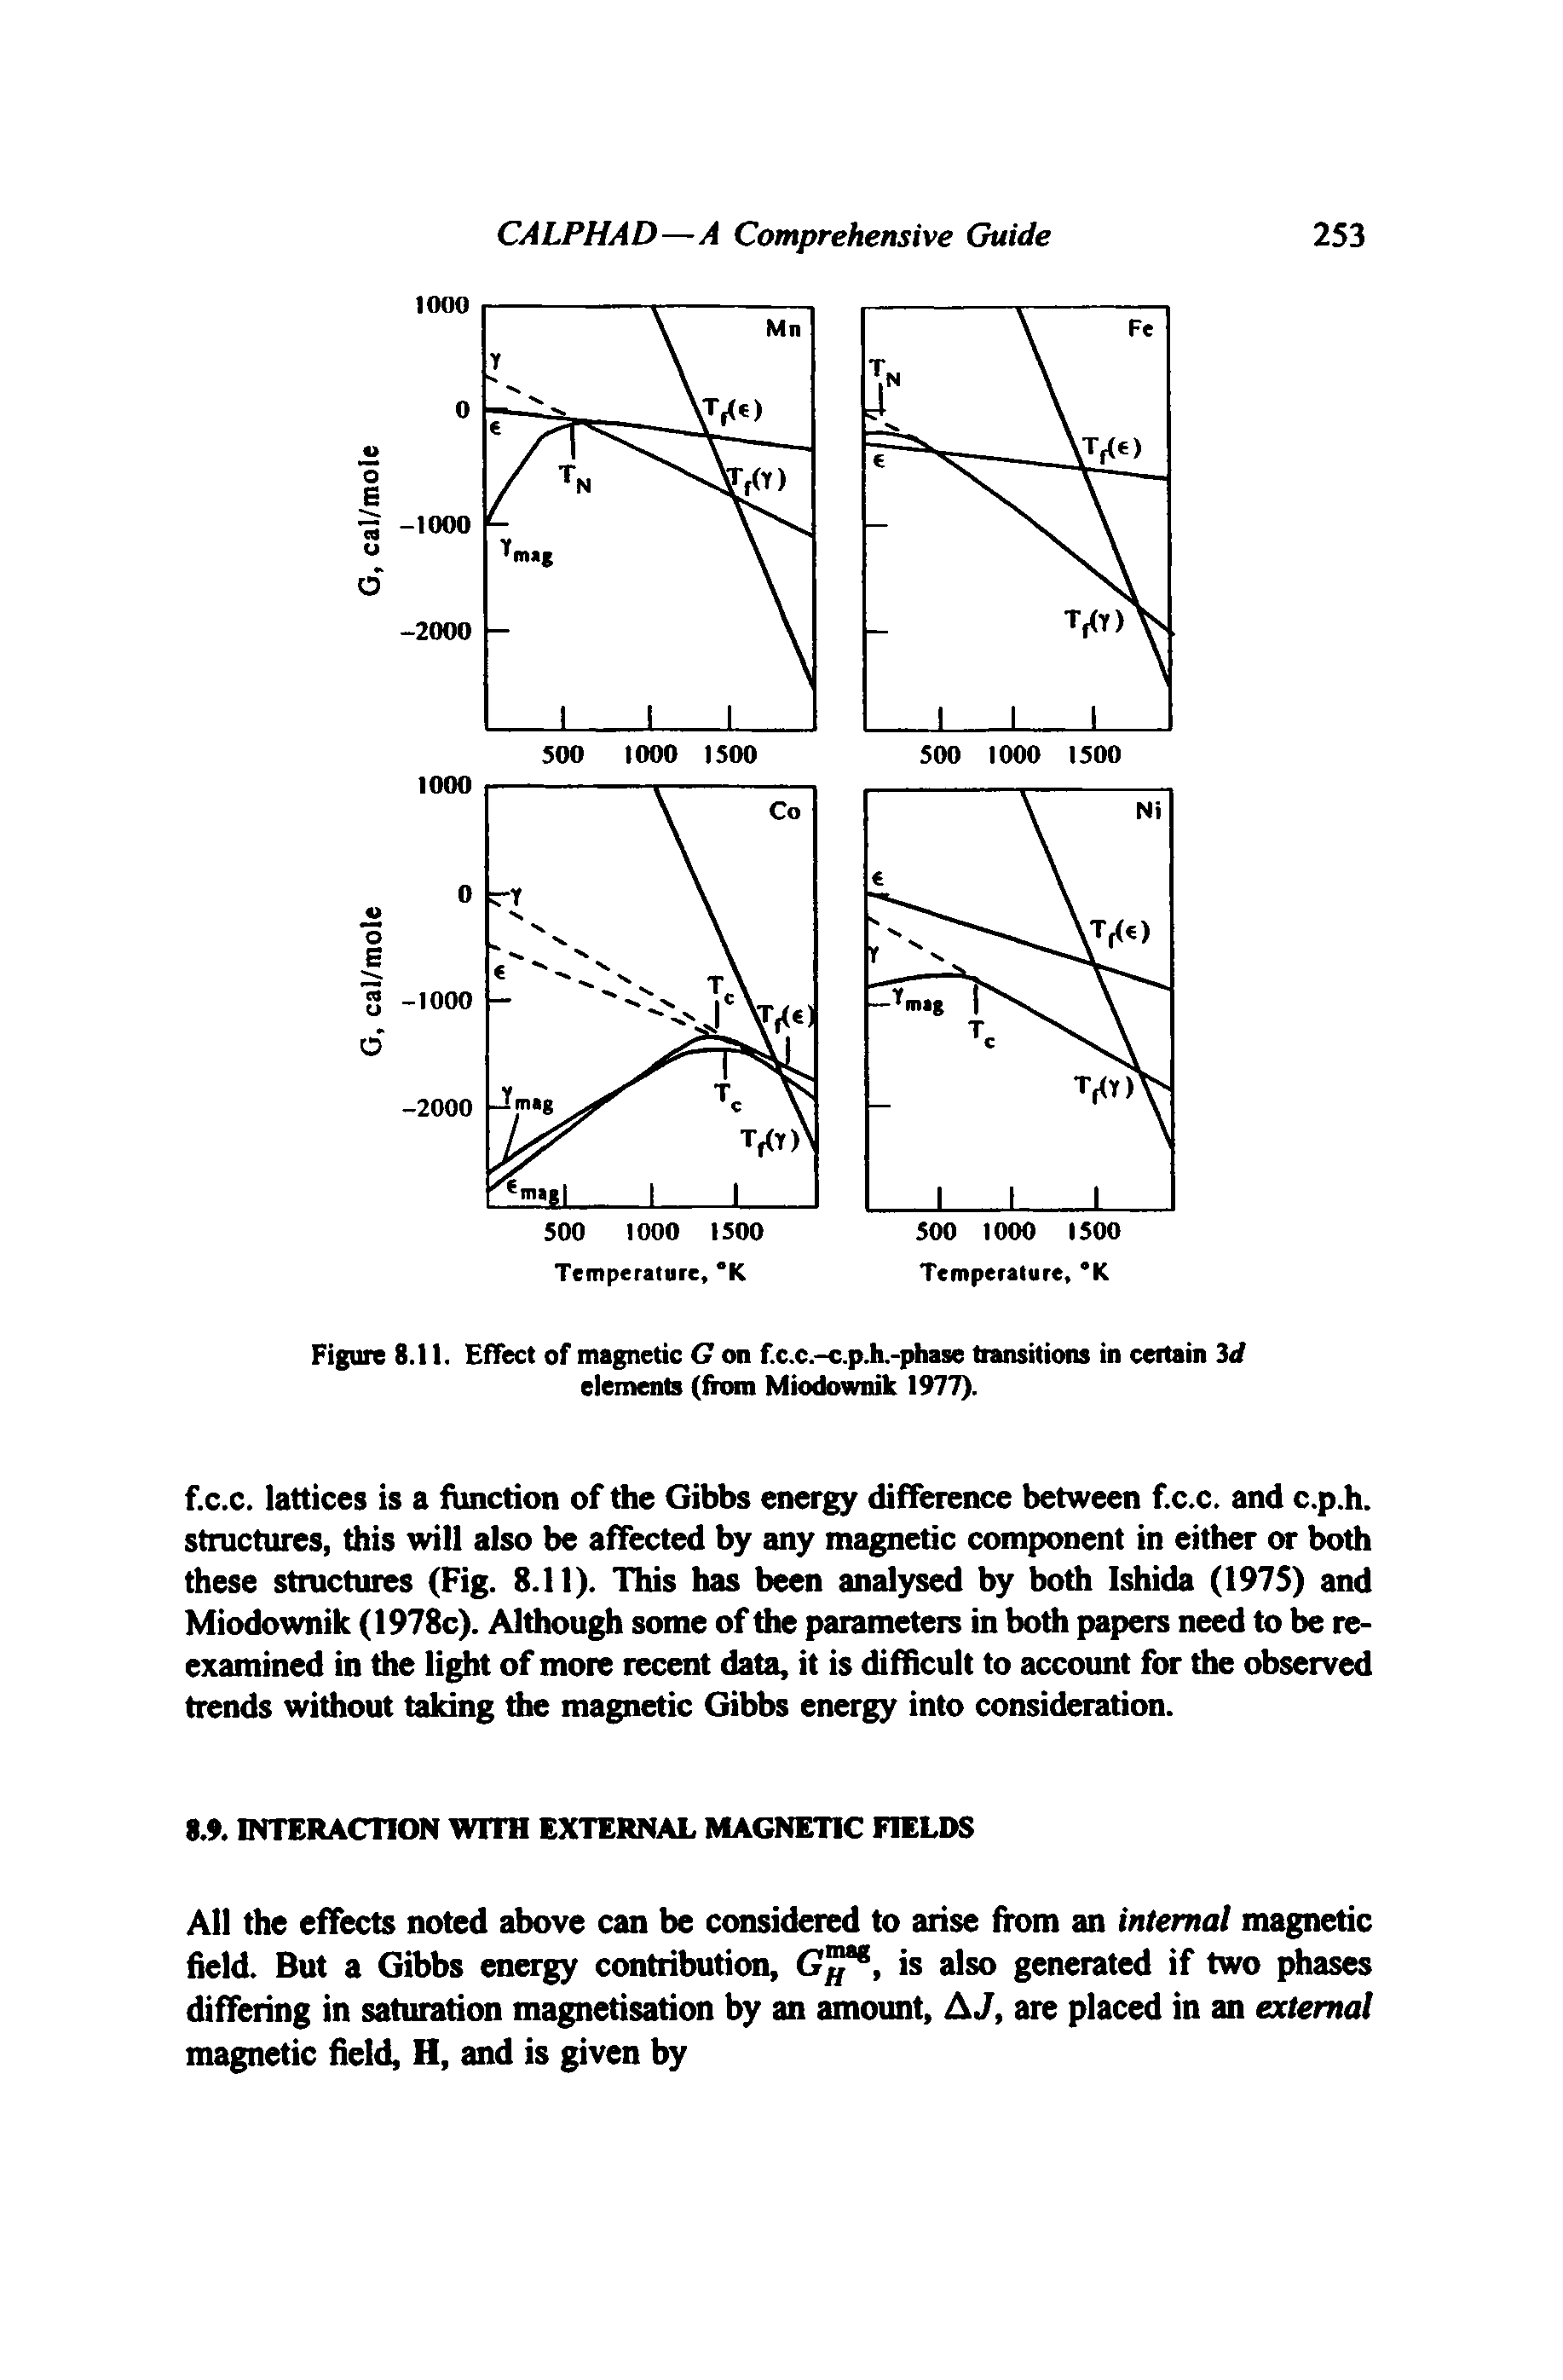 Figure 8.11. Effect of magnetic G on f.c.c.-c.p.h.-phase transitions in certain 3d elements (from Miodownik 1977).